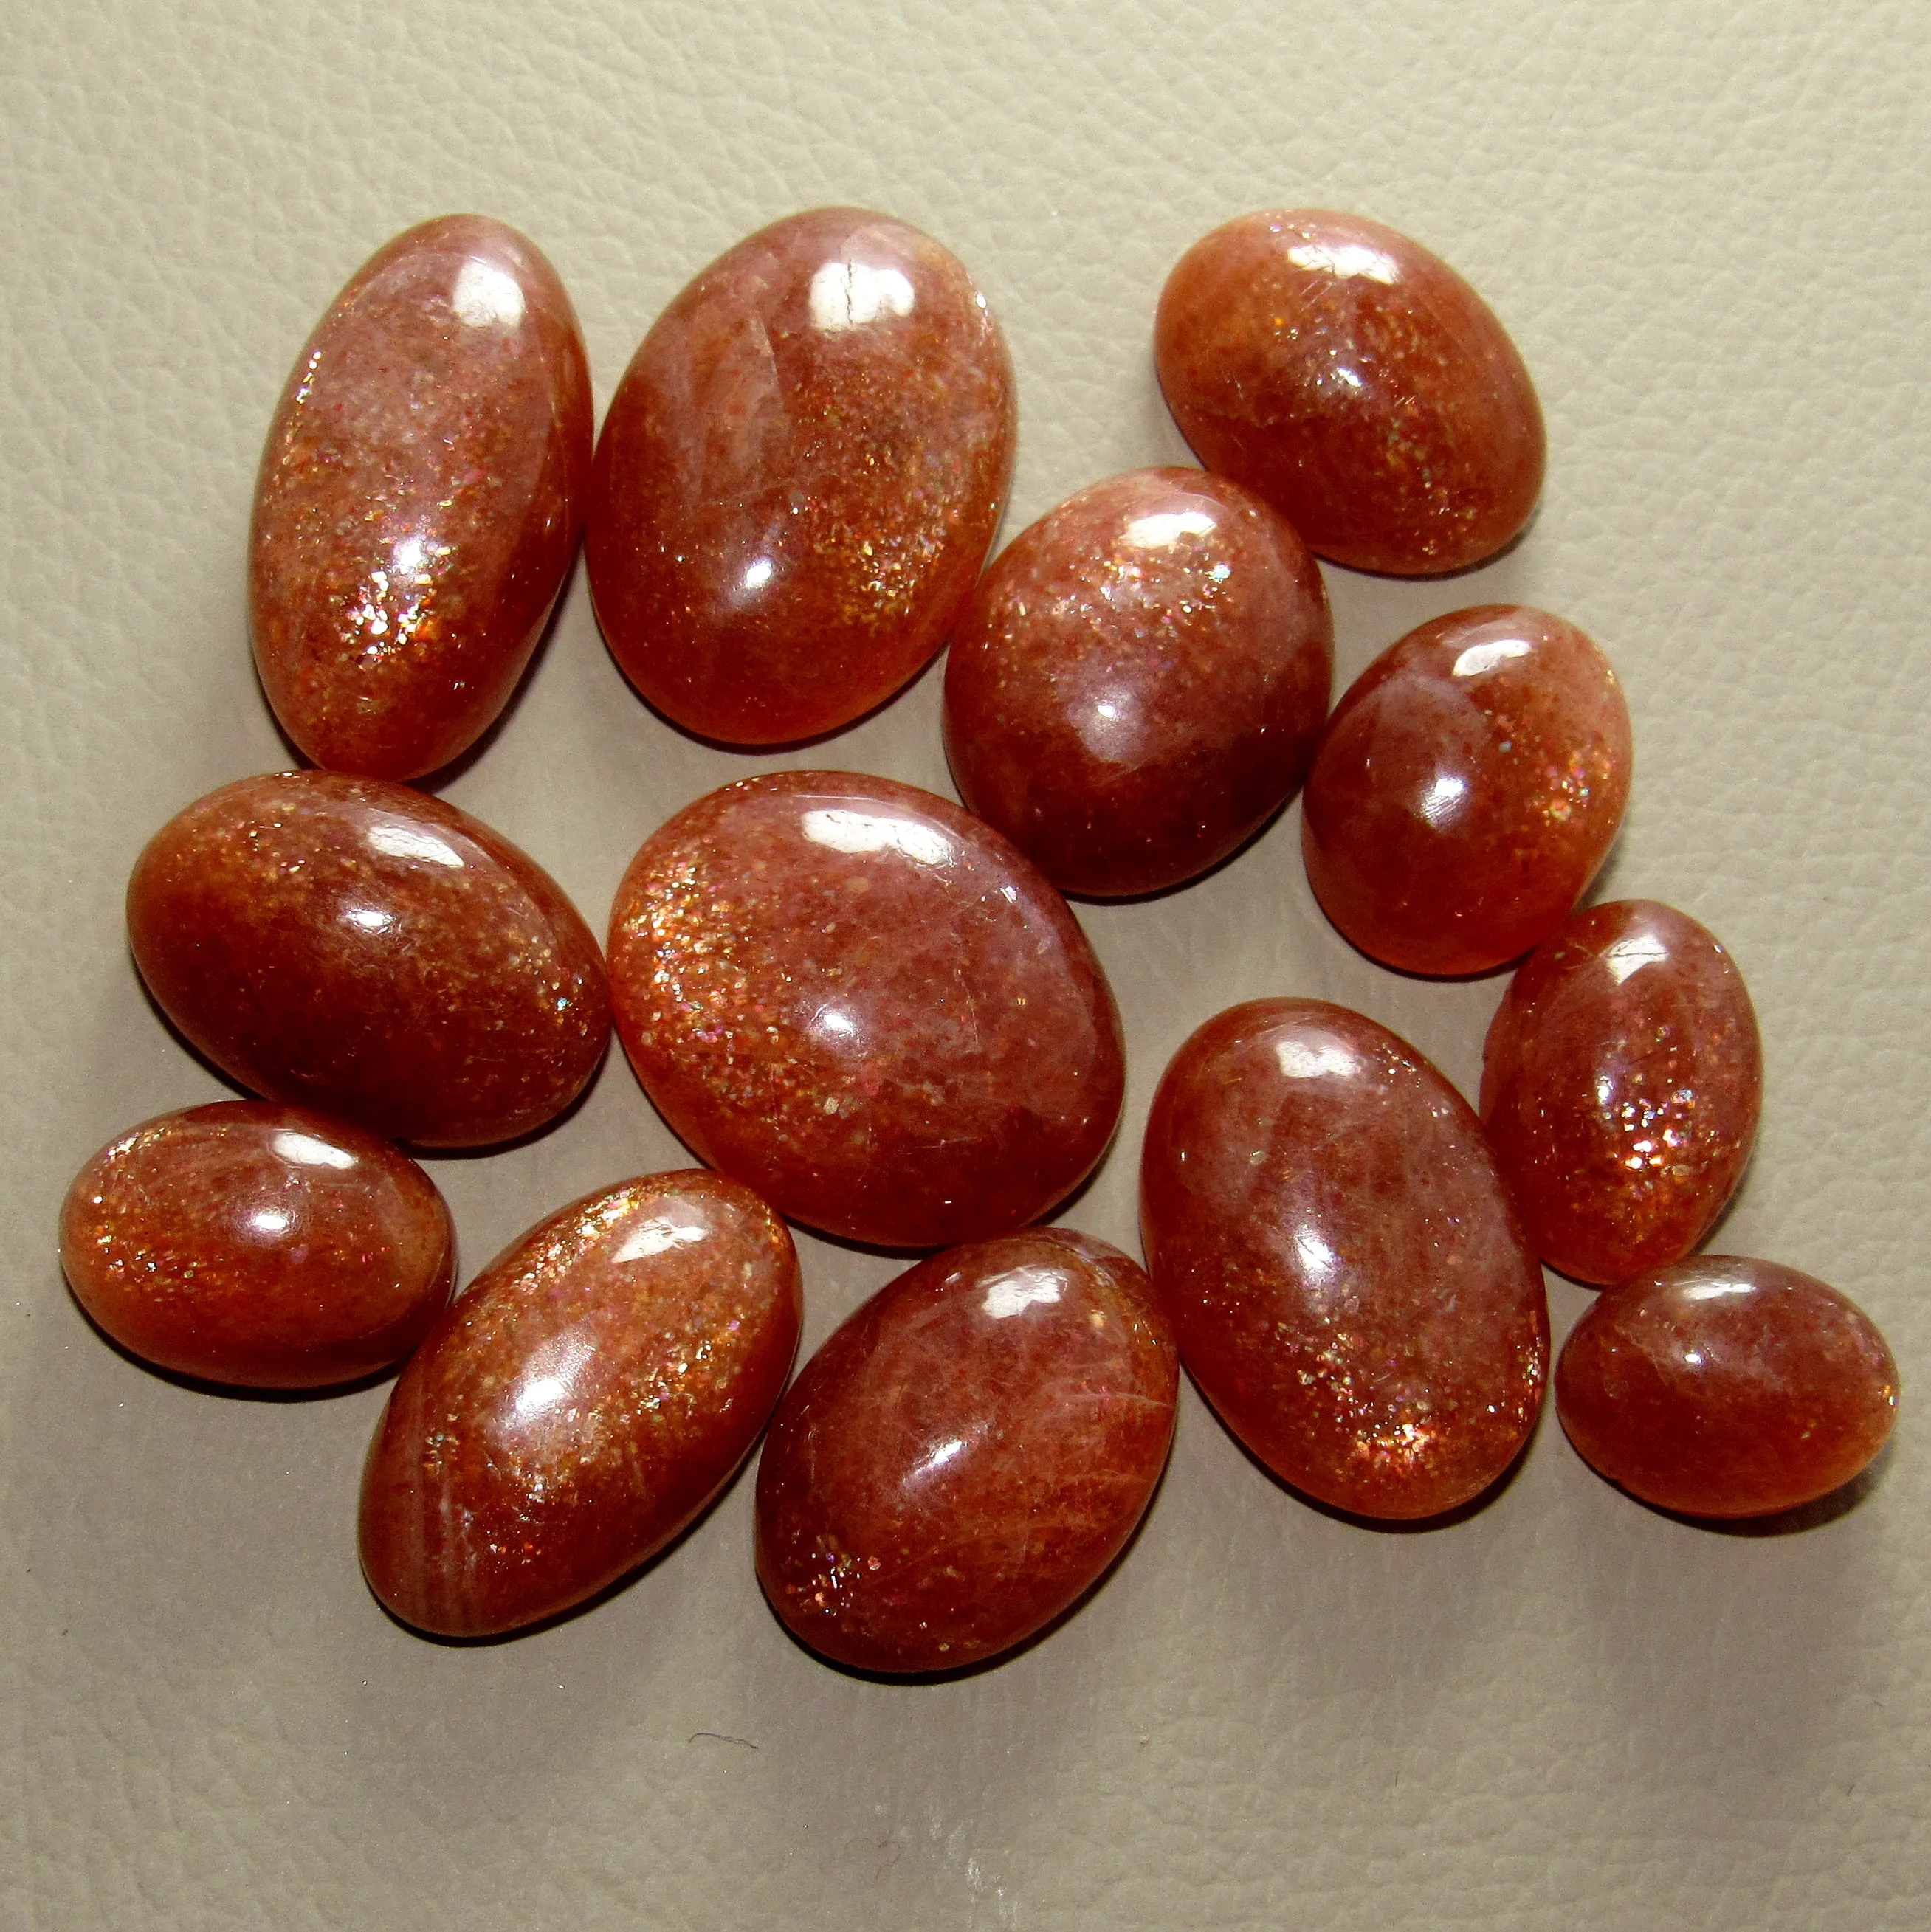 13 Pieces Natural Sun Stone Cabochons Lot 8x10mm Oval Shape Genuine Sunstone Gemstone Cab Loose Stones Smooth Gems Cabs C-17107